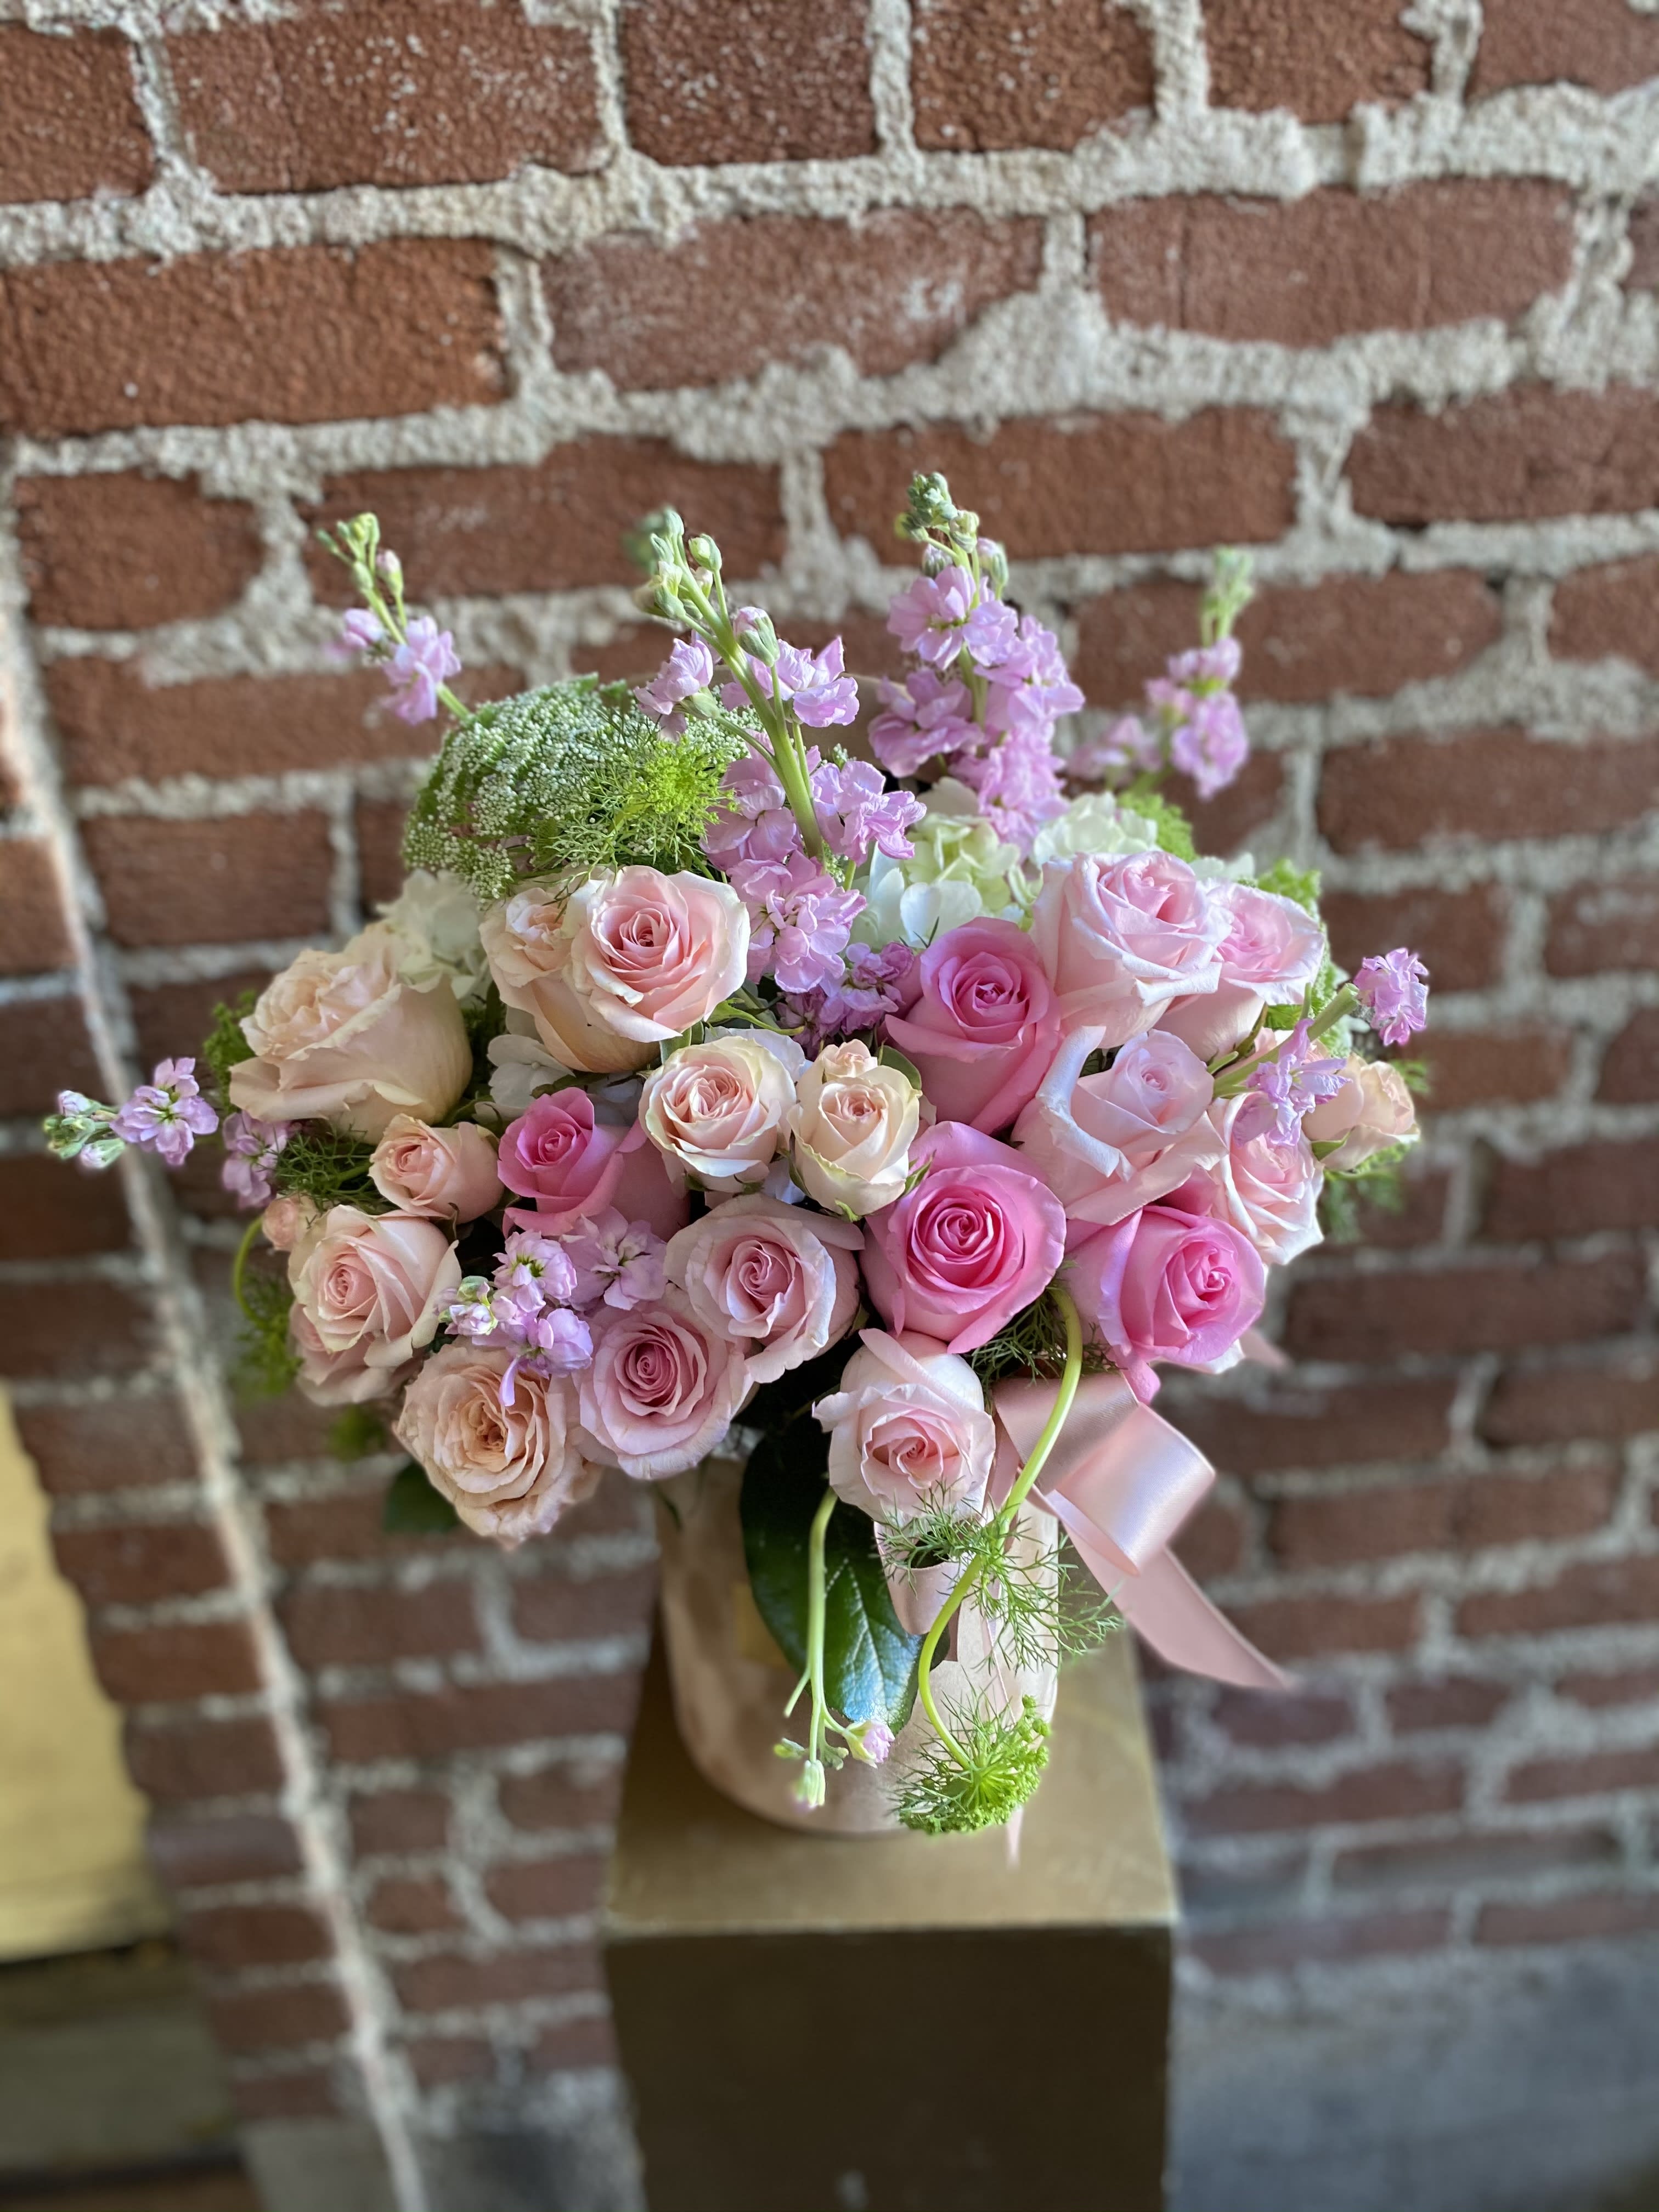 Sugar - Sylmar Florist - This beautiful arrangement is designed to deliver happiness to a loved ones day. Filled with beautiful flowers and customized to perfection, this arrangement is a showstopper! If you want to turn heads then this is the arrangement for you!  